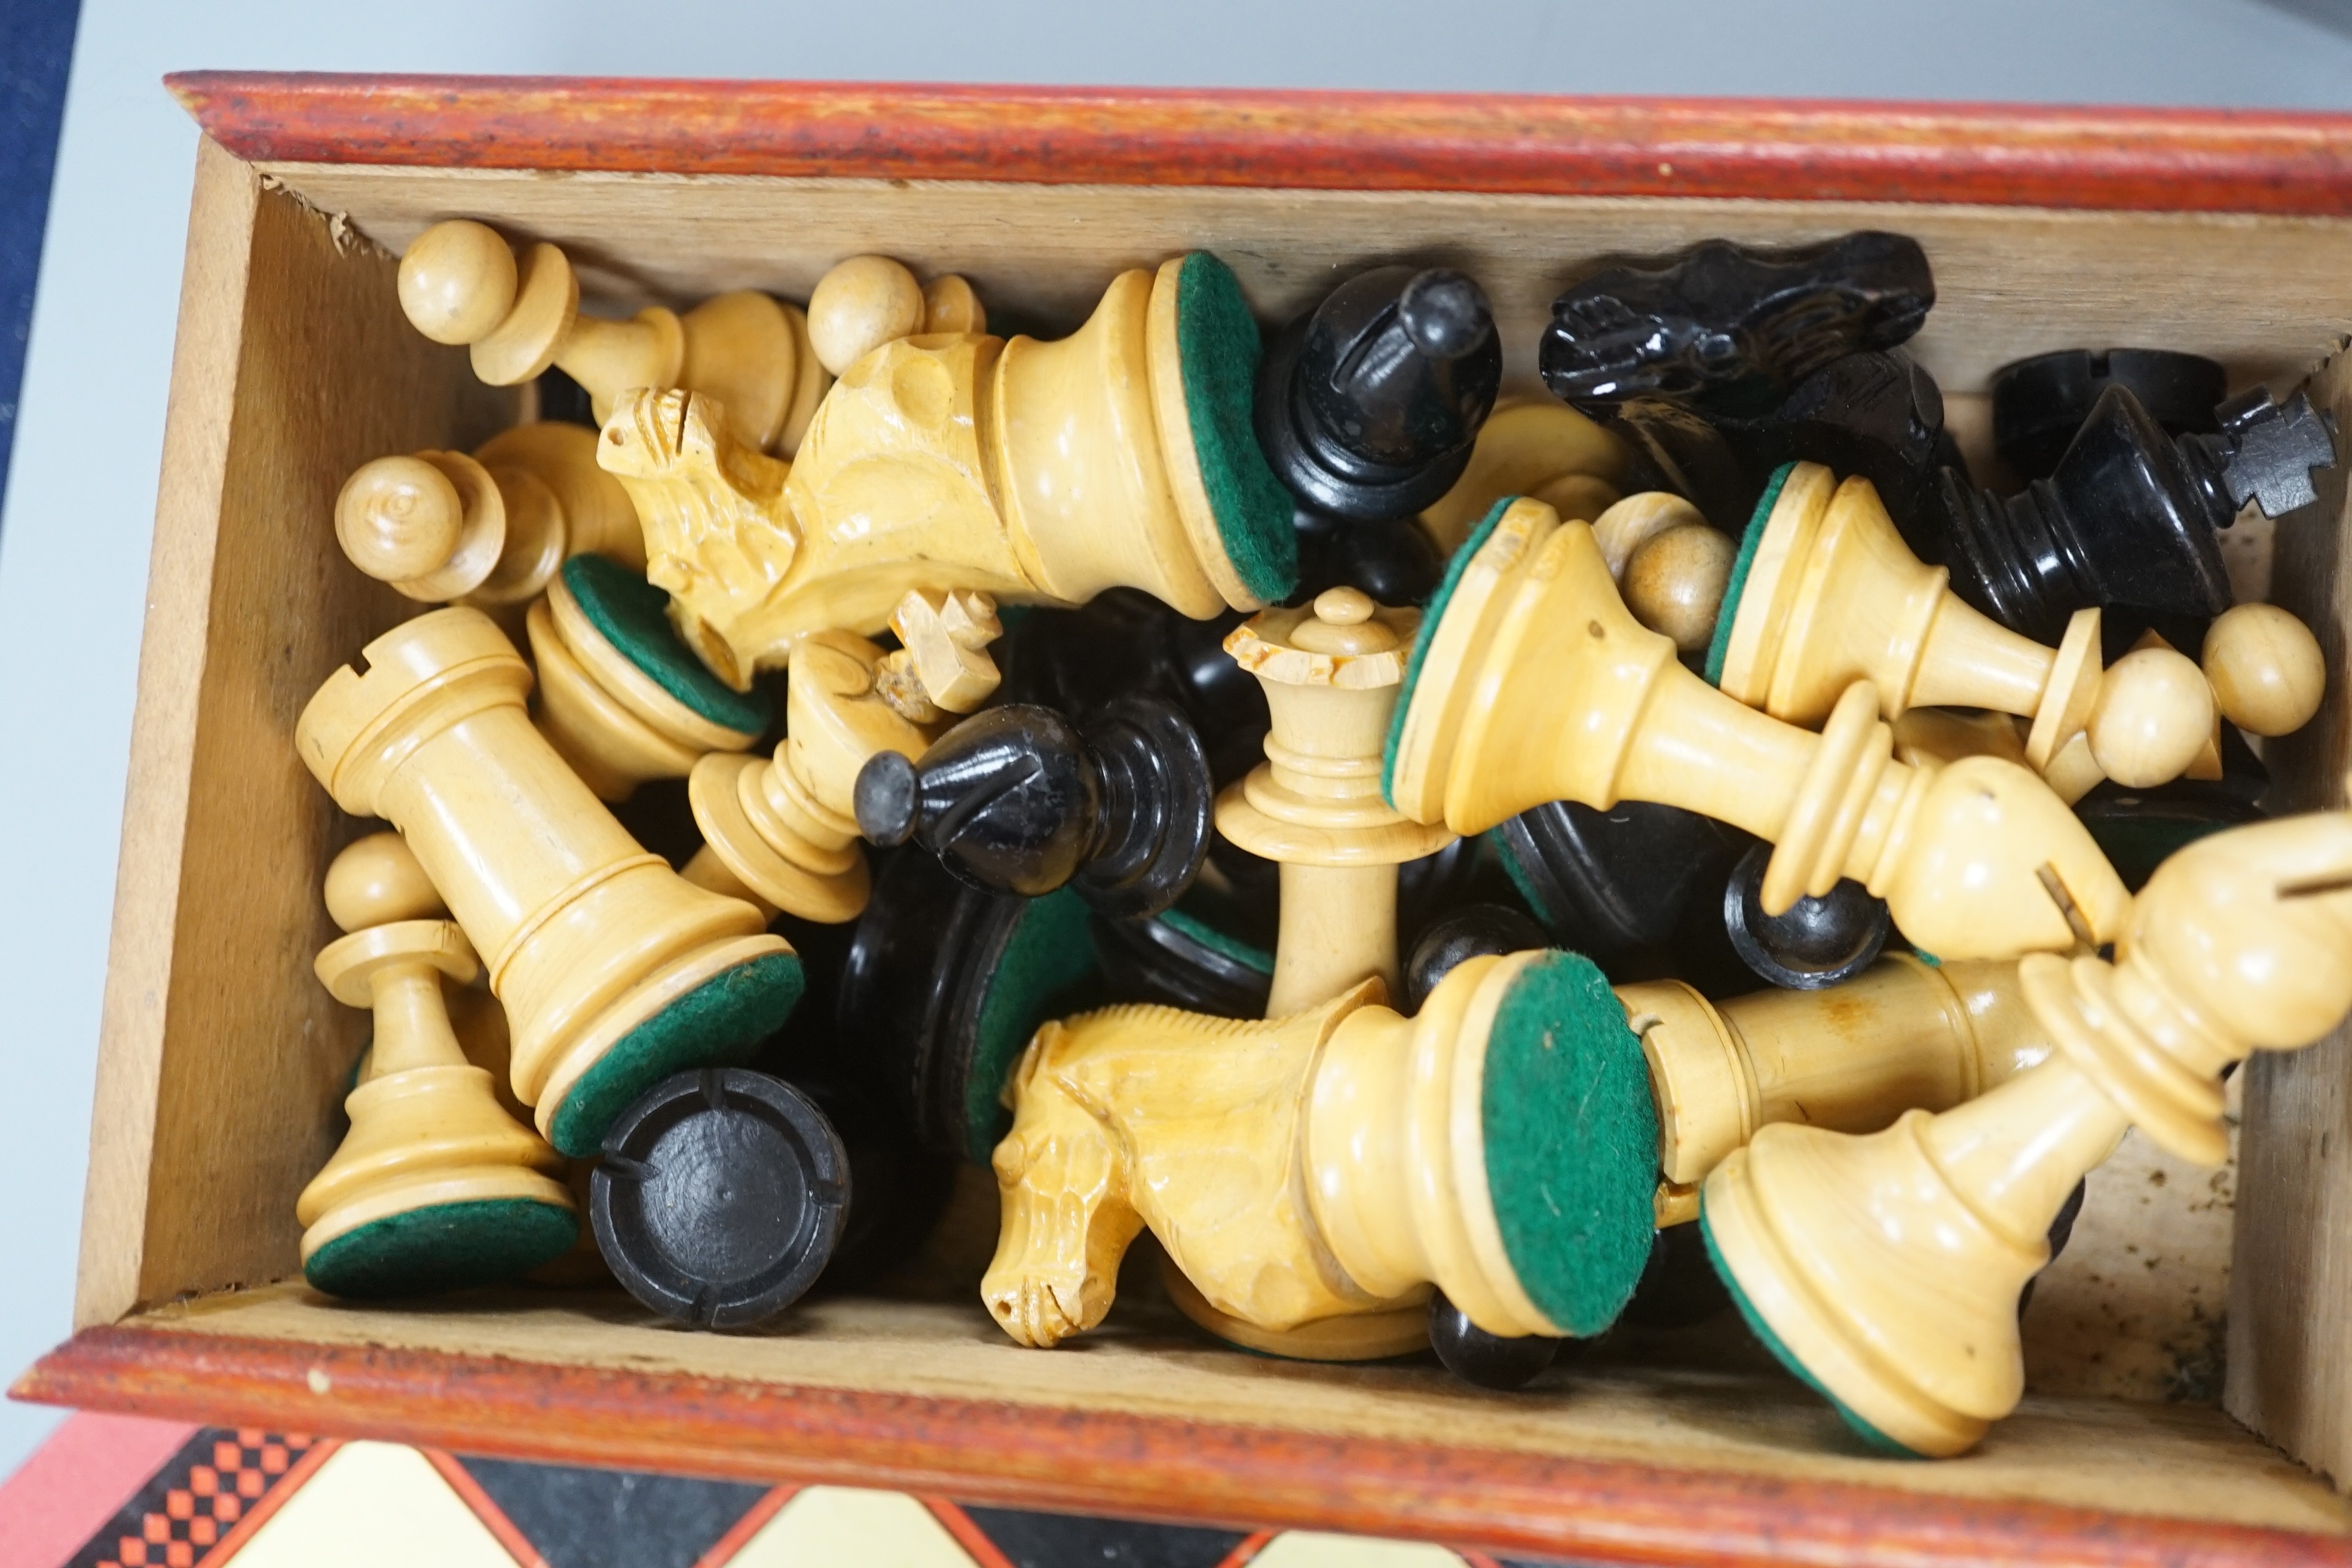 A wooden Staunton chess set and board